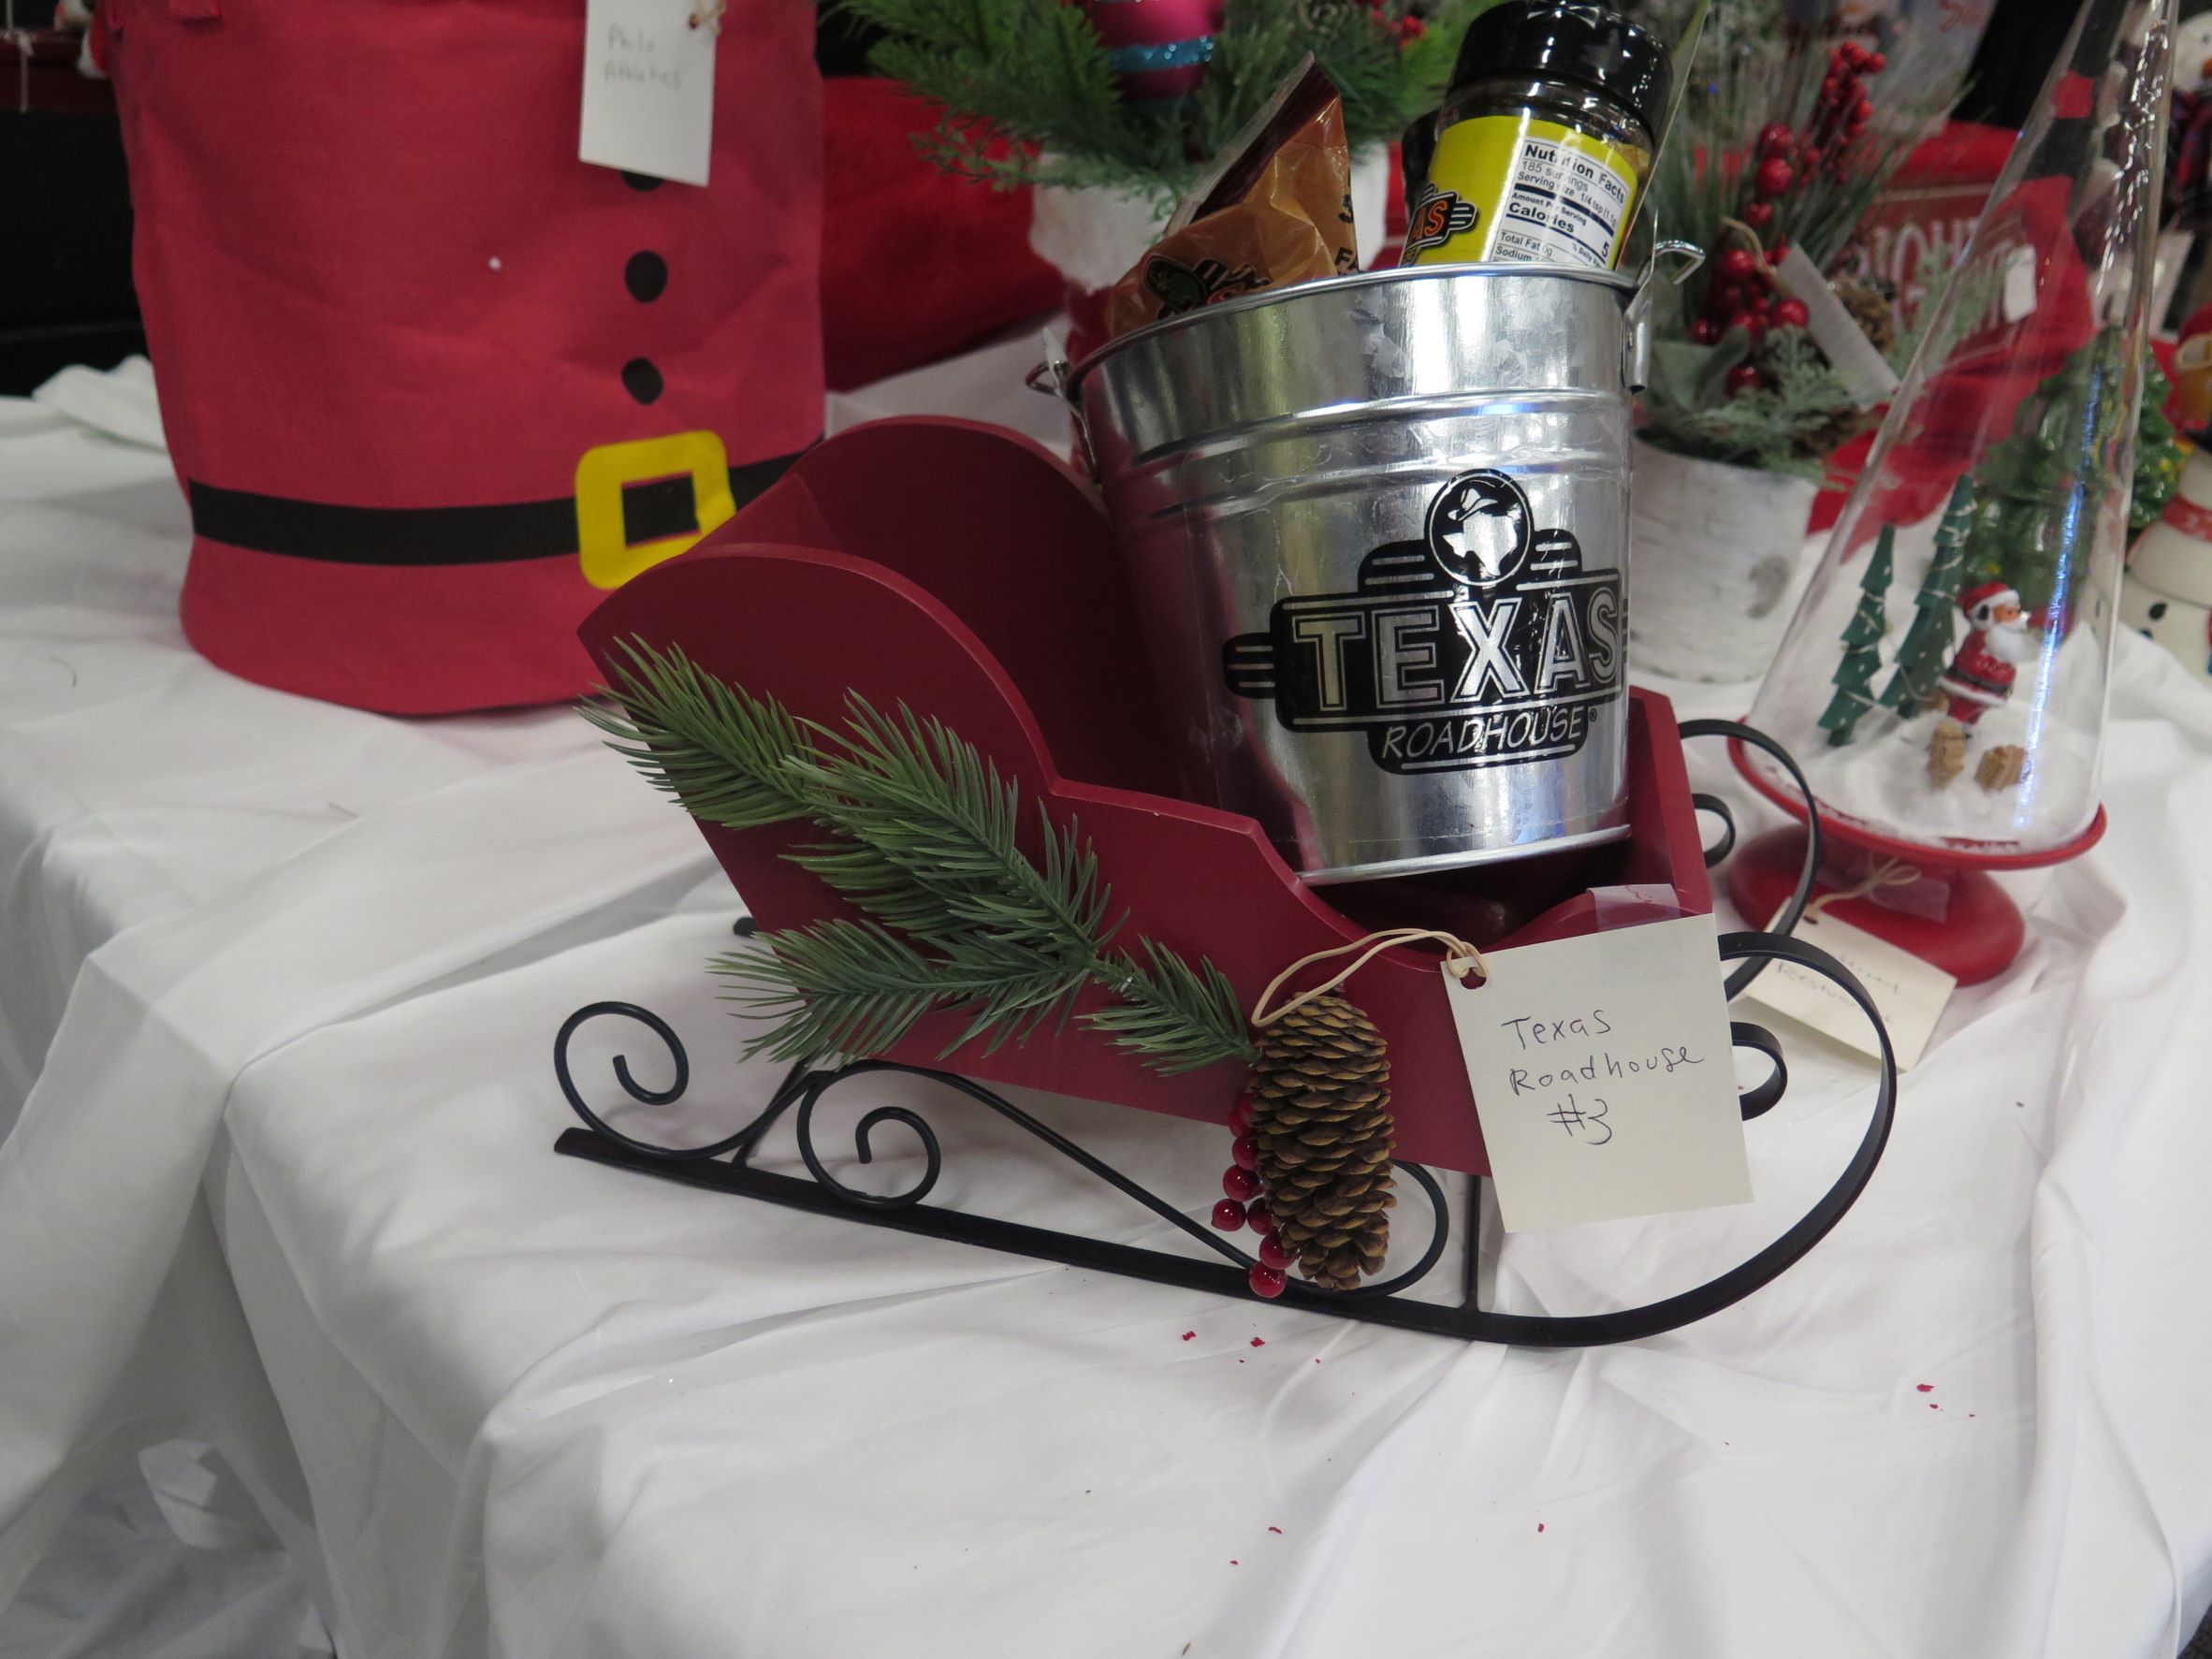 /Events/Festival Of Trees/Images/Texas Road house 3.JPG